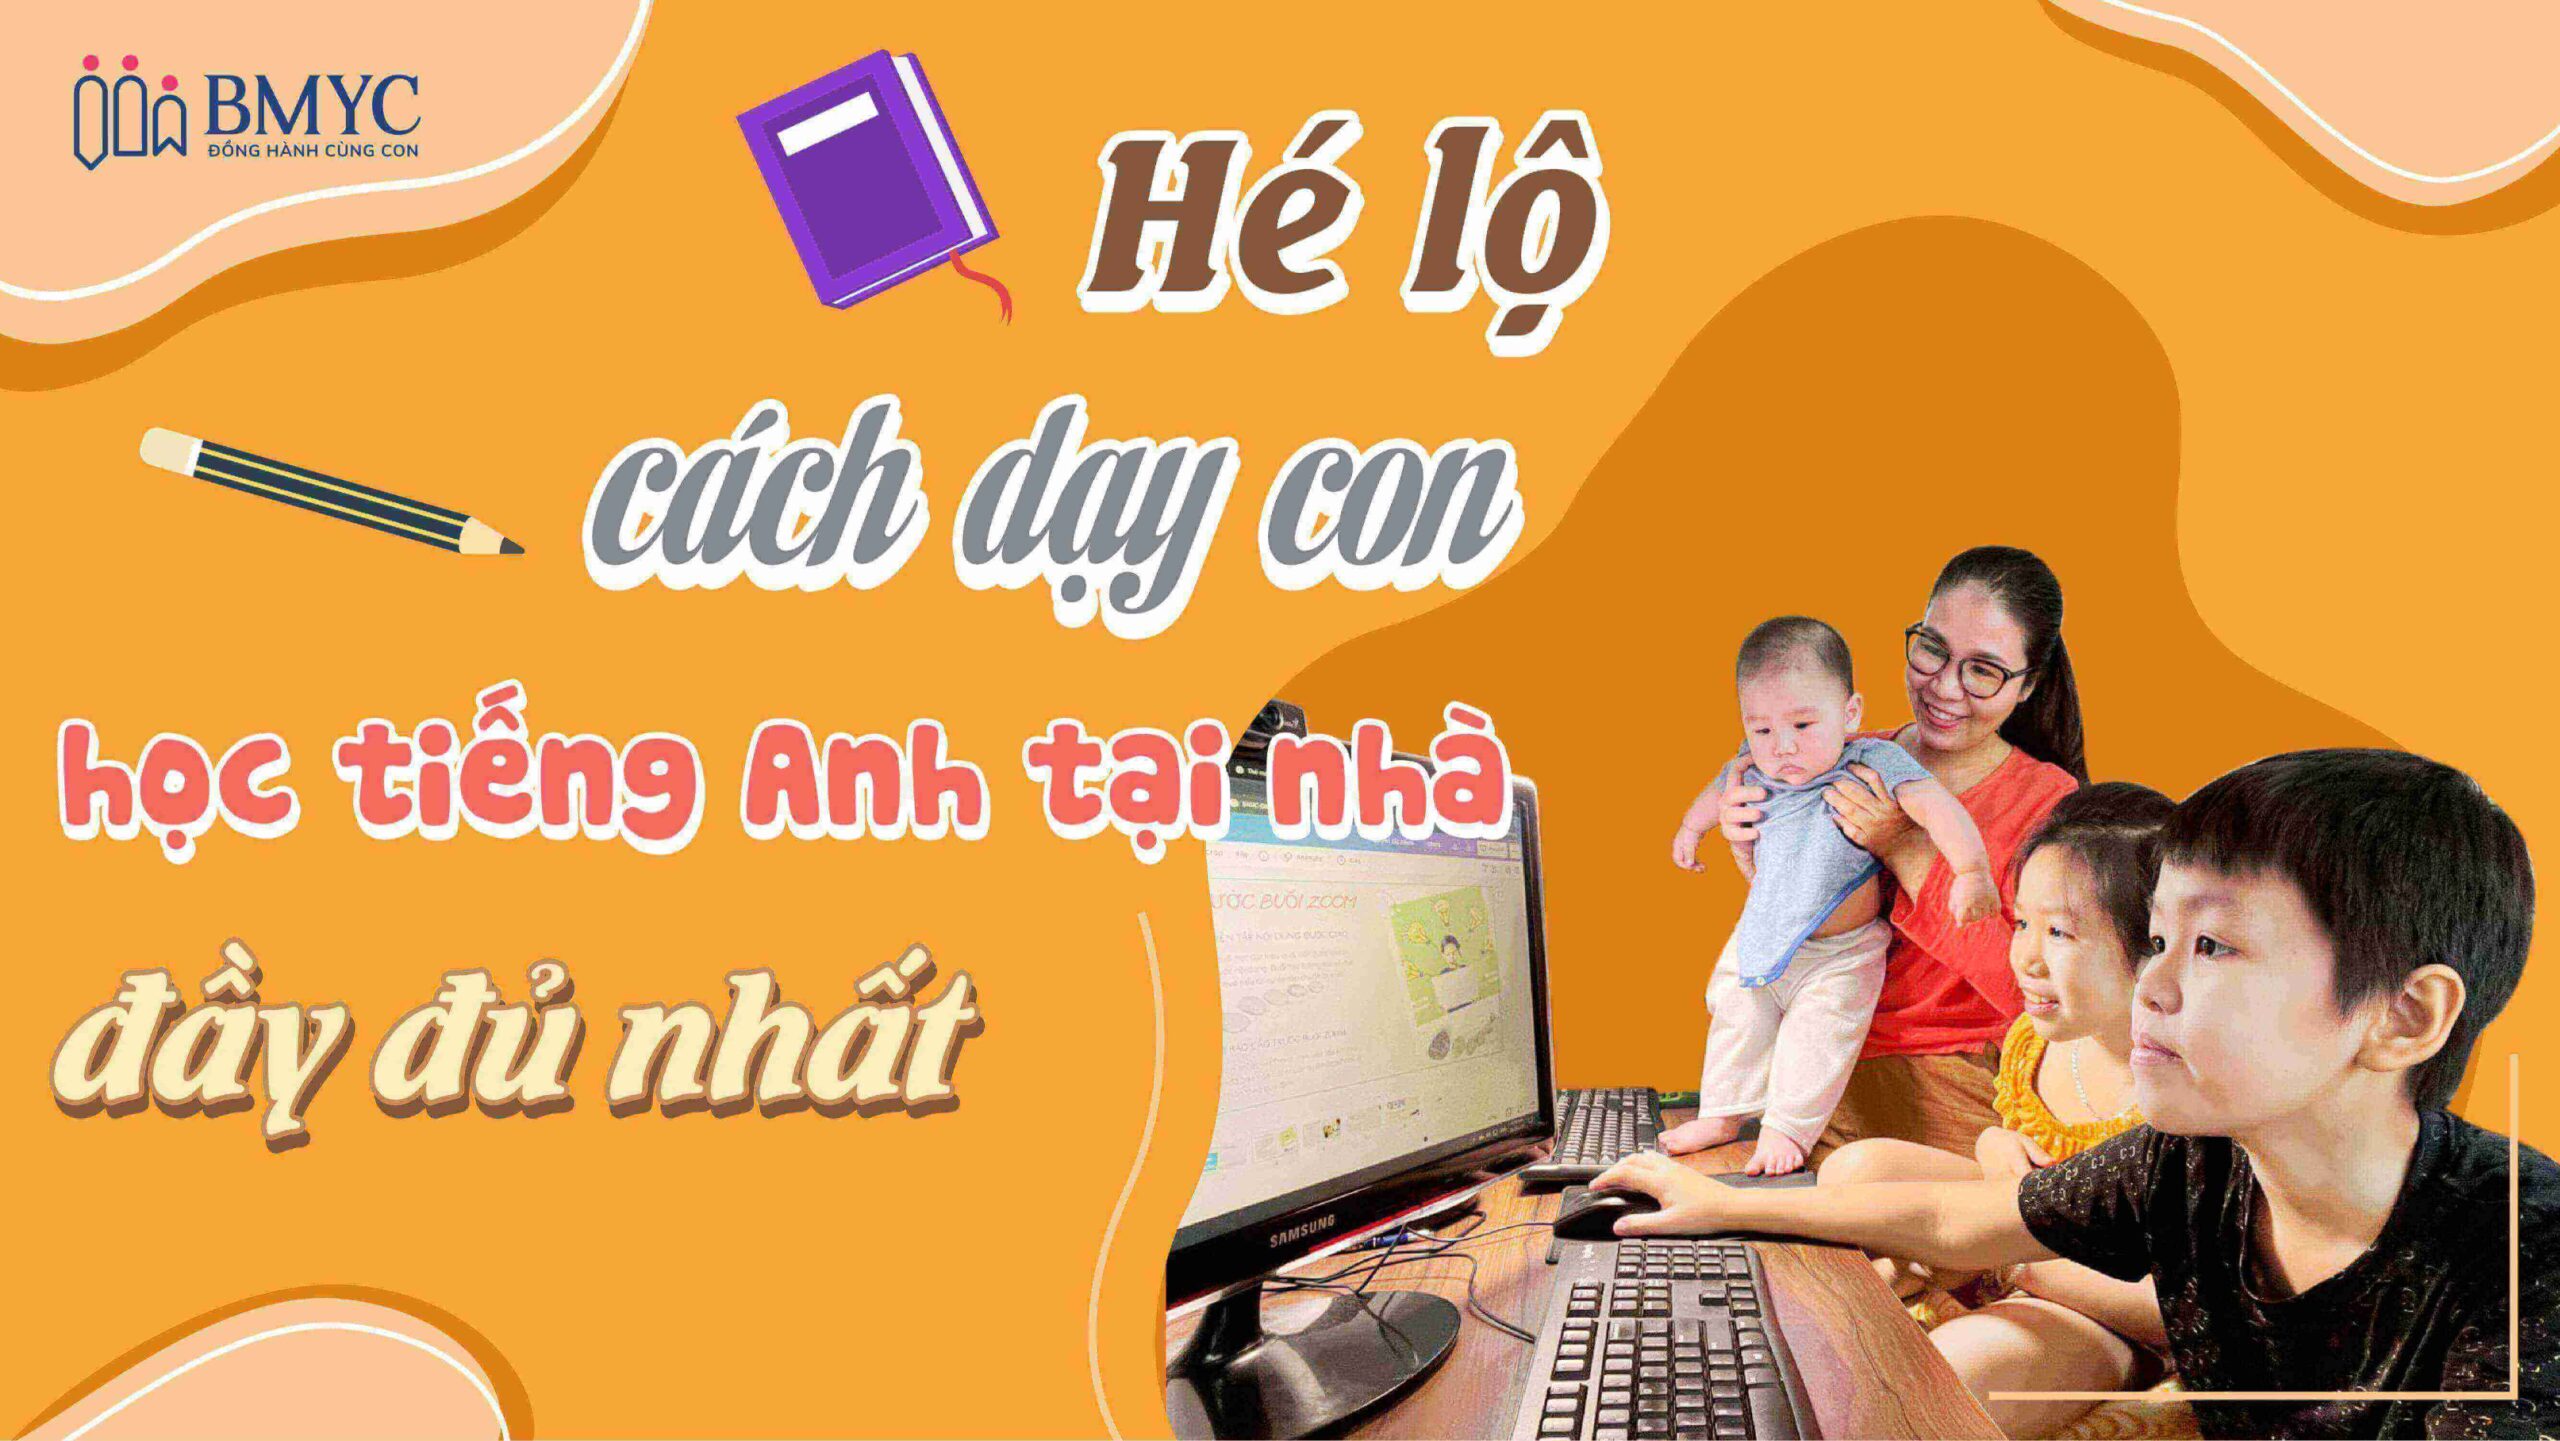 He lo cach day con tieng anh tai nha day du nhat 2 scaled